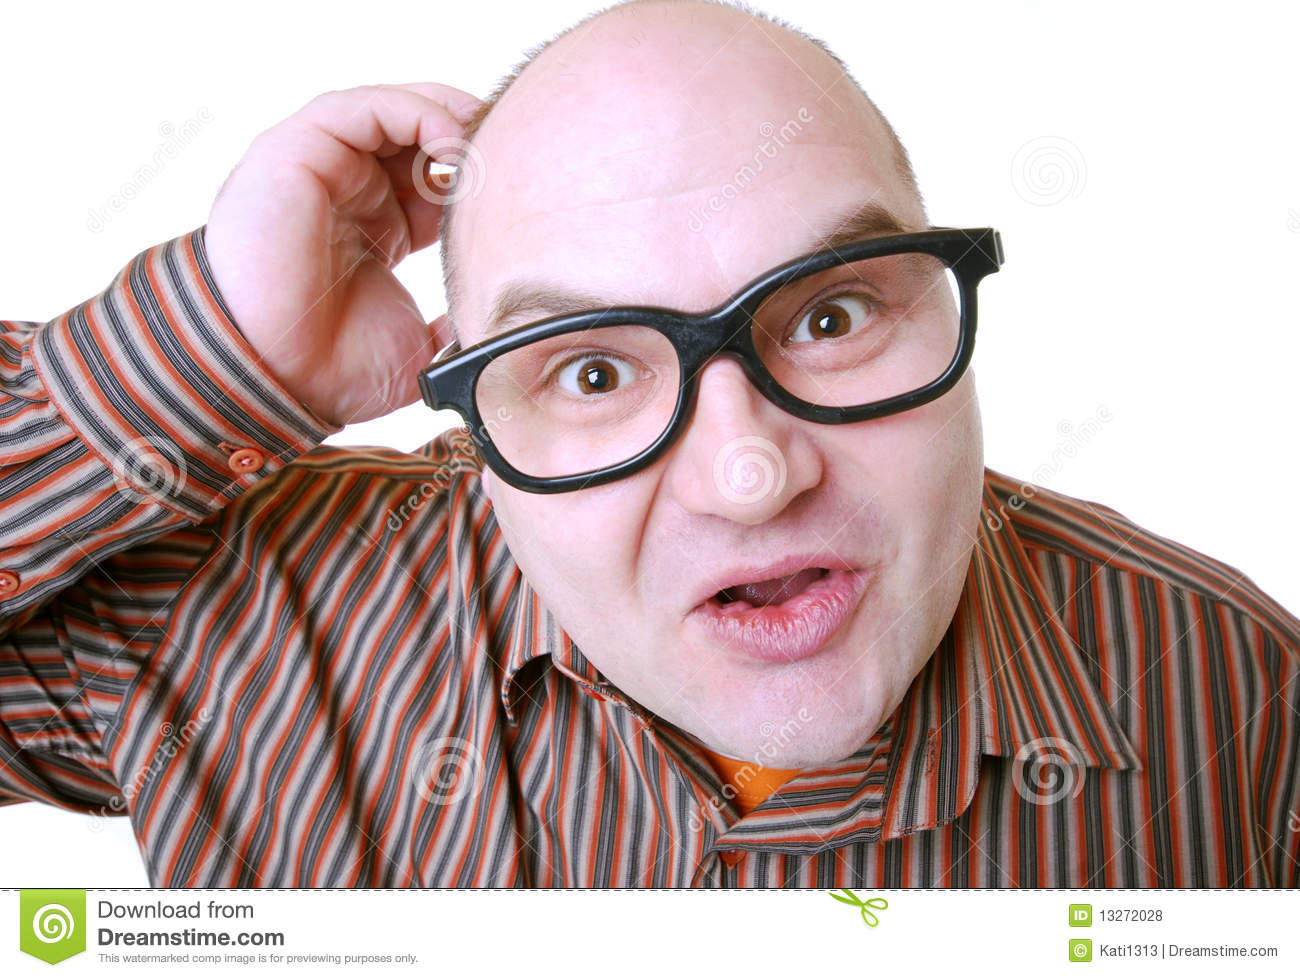 Man With Glasses With An Astonished Expression